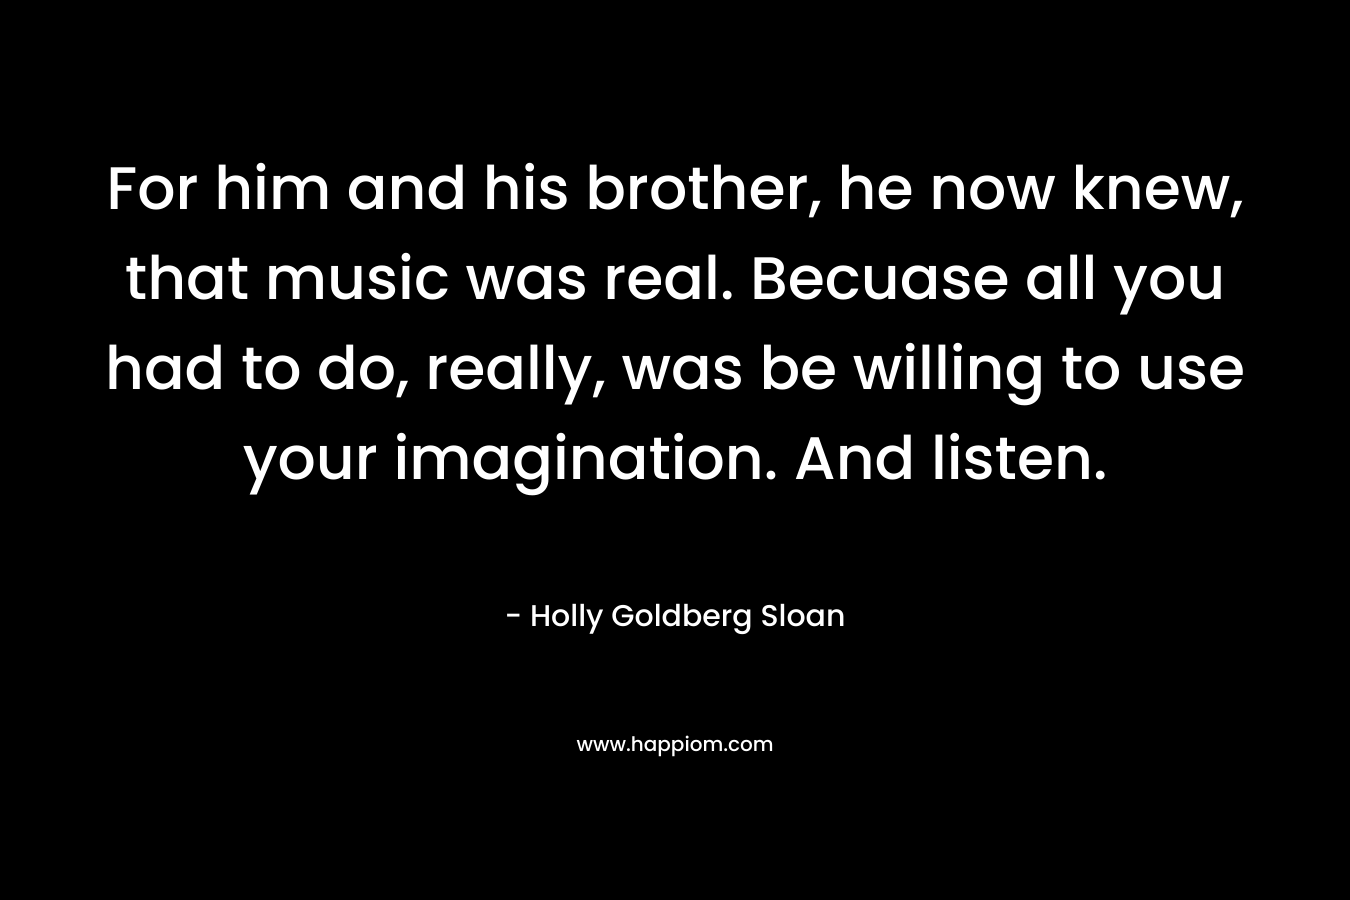 For him and his brother, he now knew, that music was real. Becuase all you had to do, really, was be willing to use your imagination. And listen. – Holly Goldberg Sloan